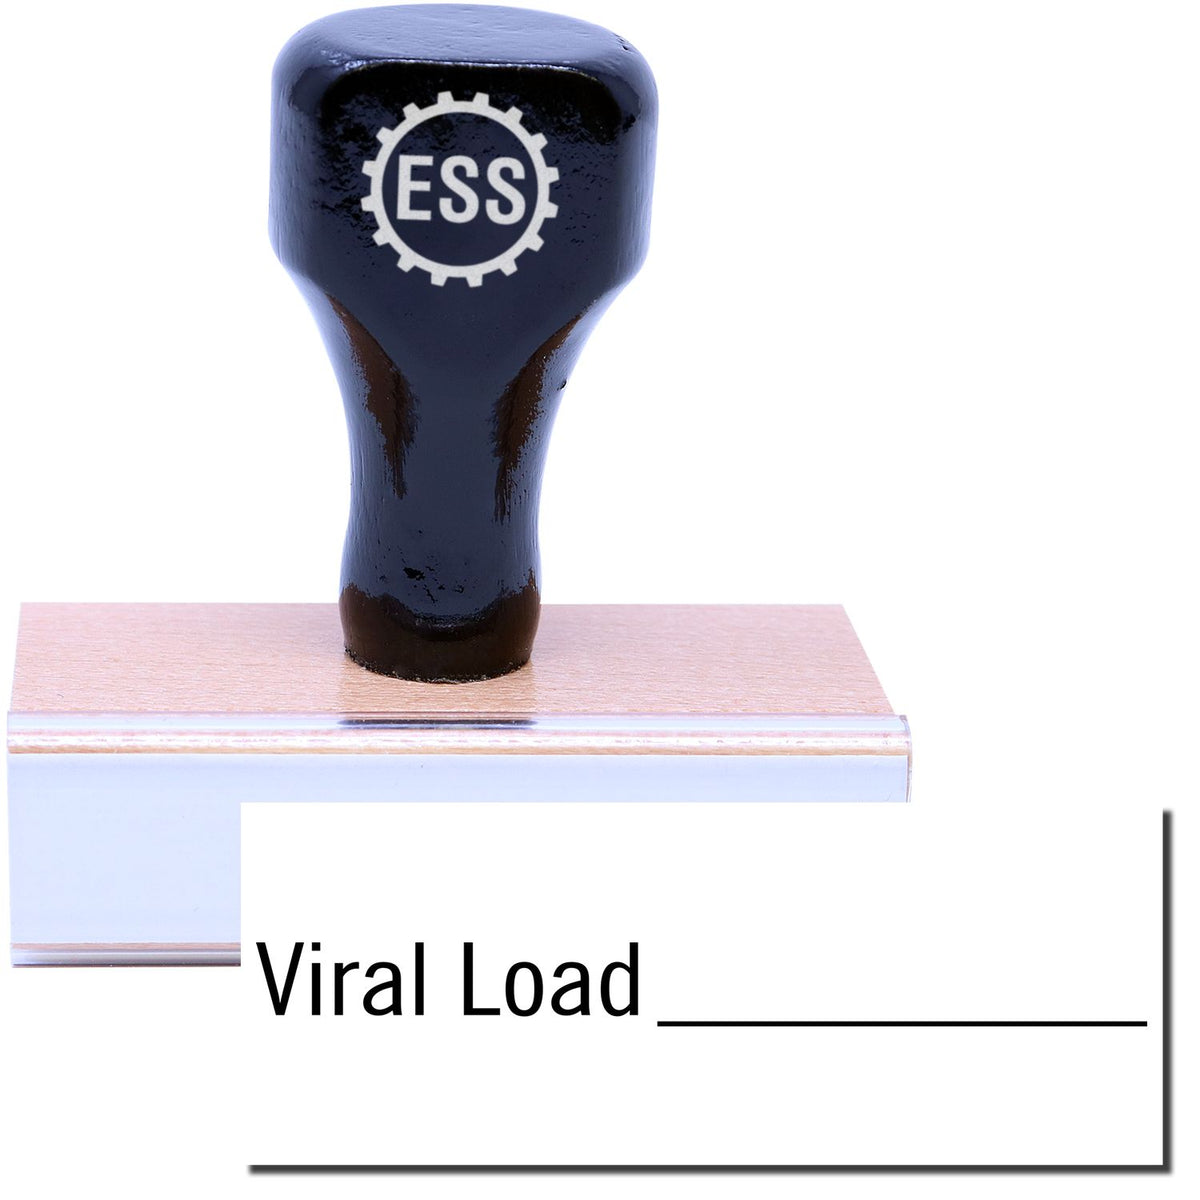 A stock office rubber stamp with a stamped image showing how the text &quot;Viral Load&quot; in a large font with a line is displayed after stamping.